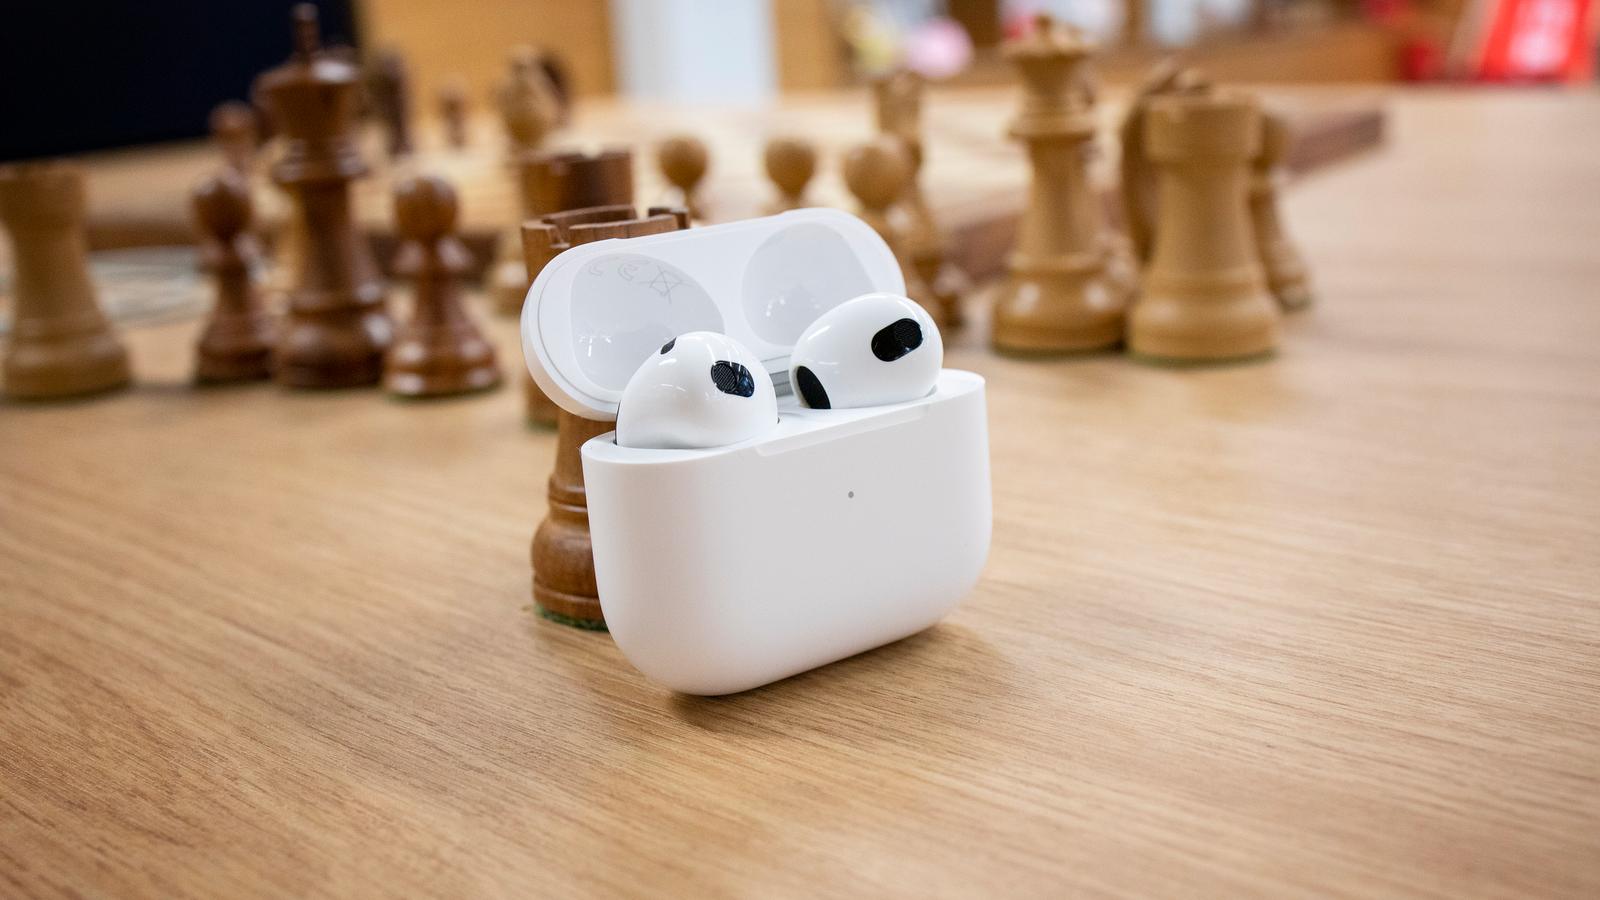 Apple’s Plans for Fourth Generation AirPods and Upgrades for AirPods Max – Bloomberg Report